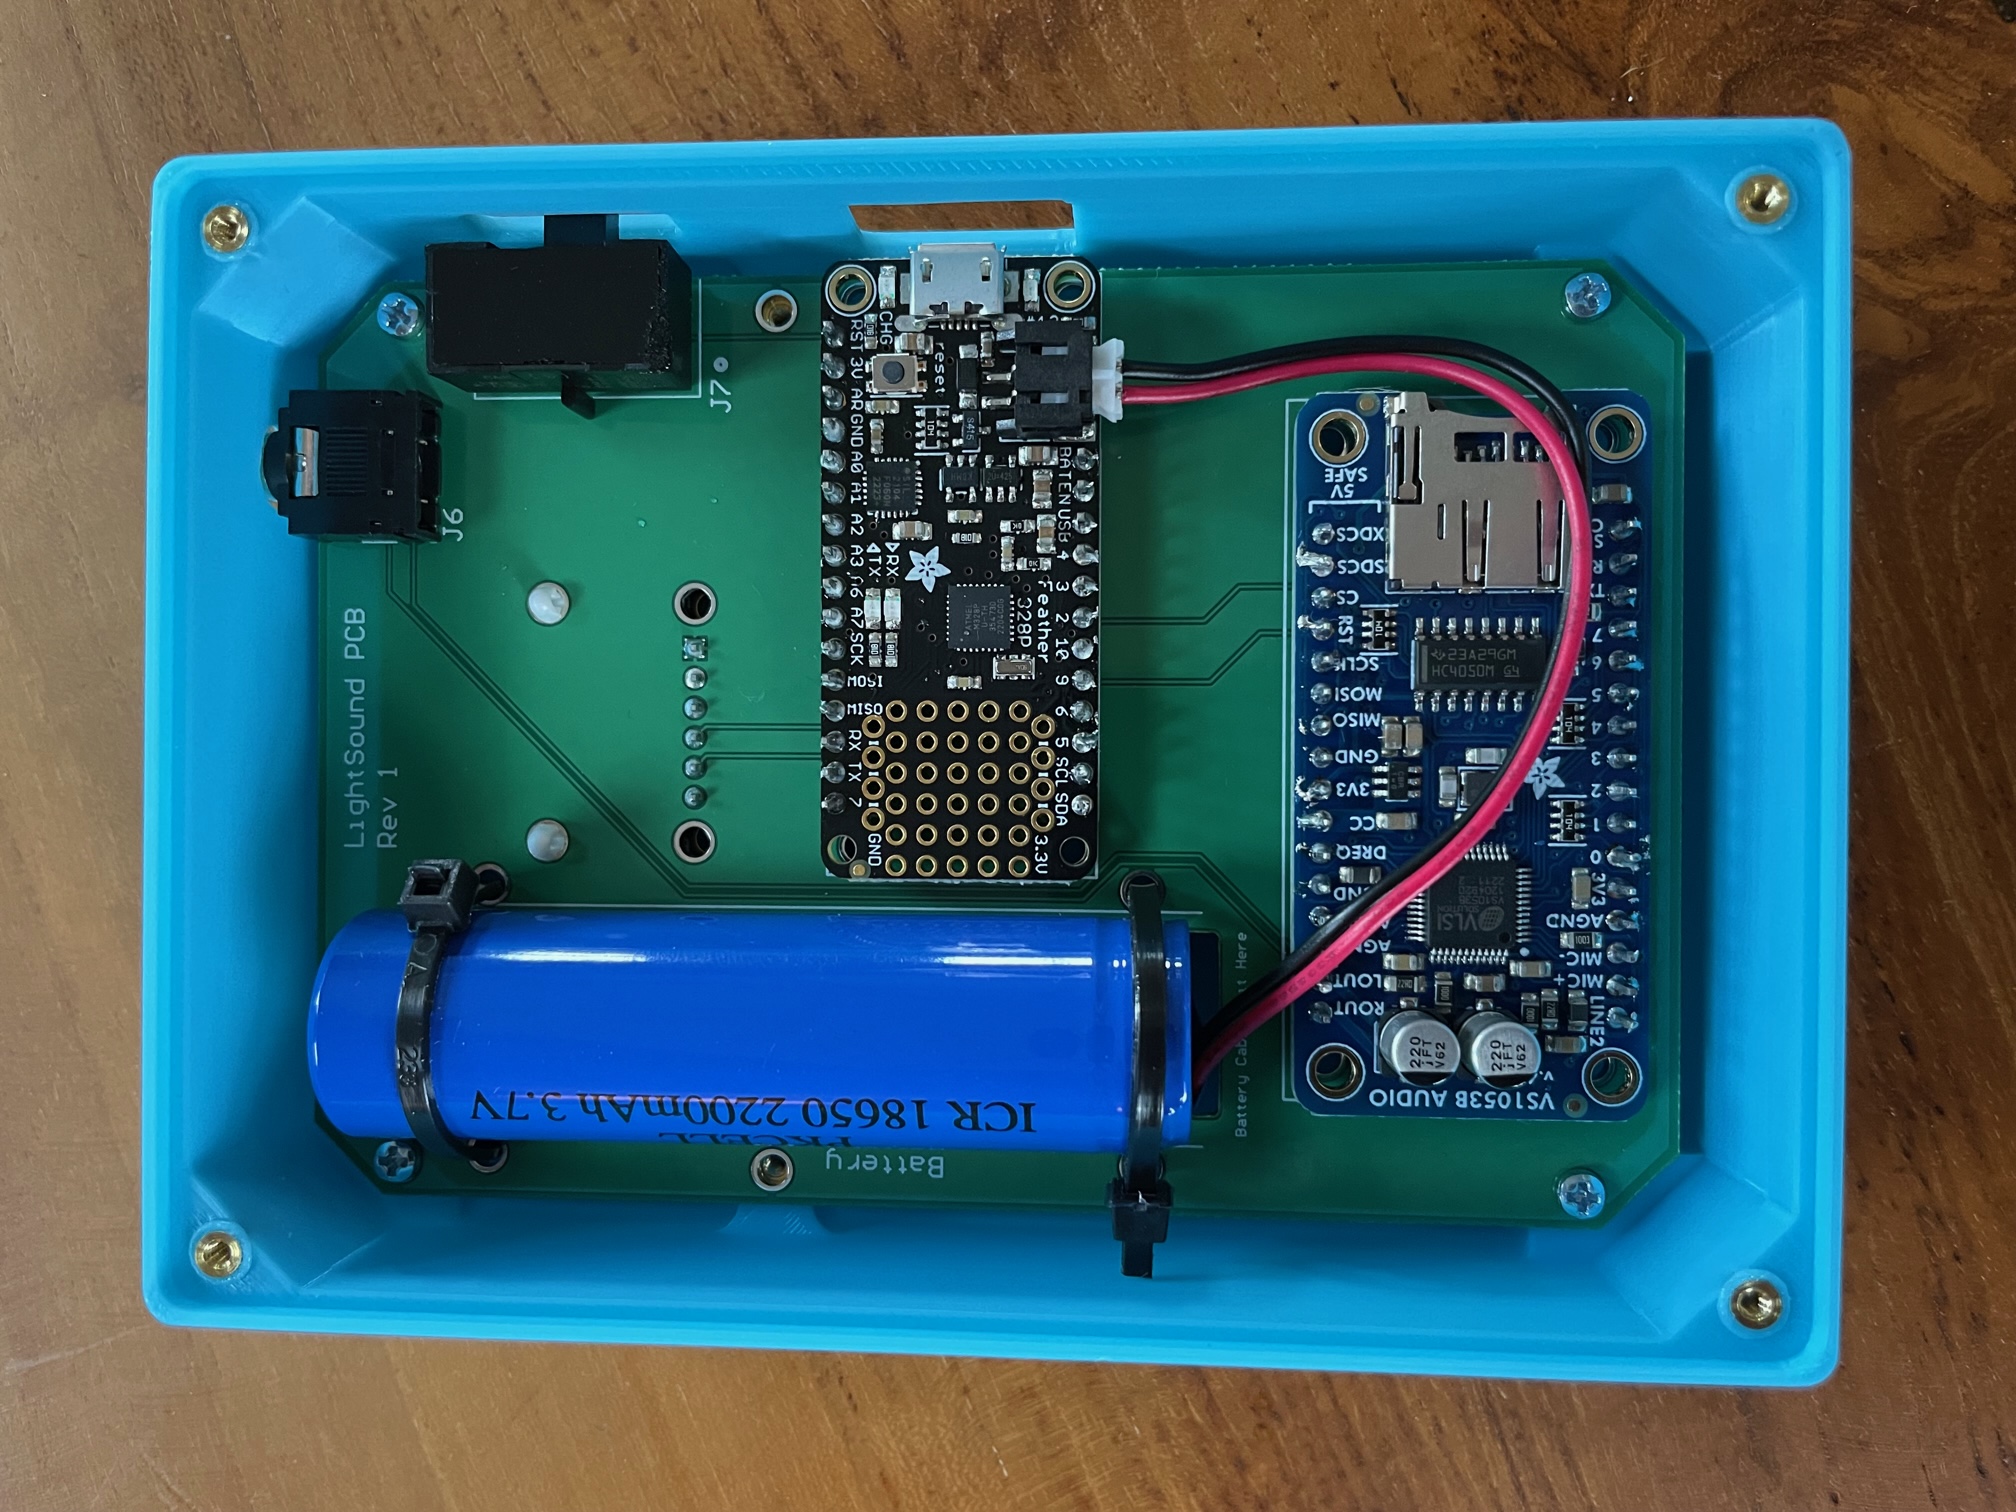 A blue LightSound case with the lid off showing the printed circuit board inside. The audio jack on the top right, on/off switch on the side right, the rectangular Feather microcontroller board in the middle, the midi board on the bottom, and a Li-ion rechargeable battery on the left of the circuit board.